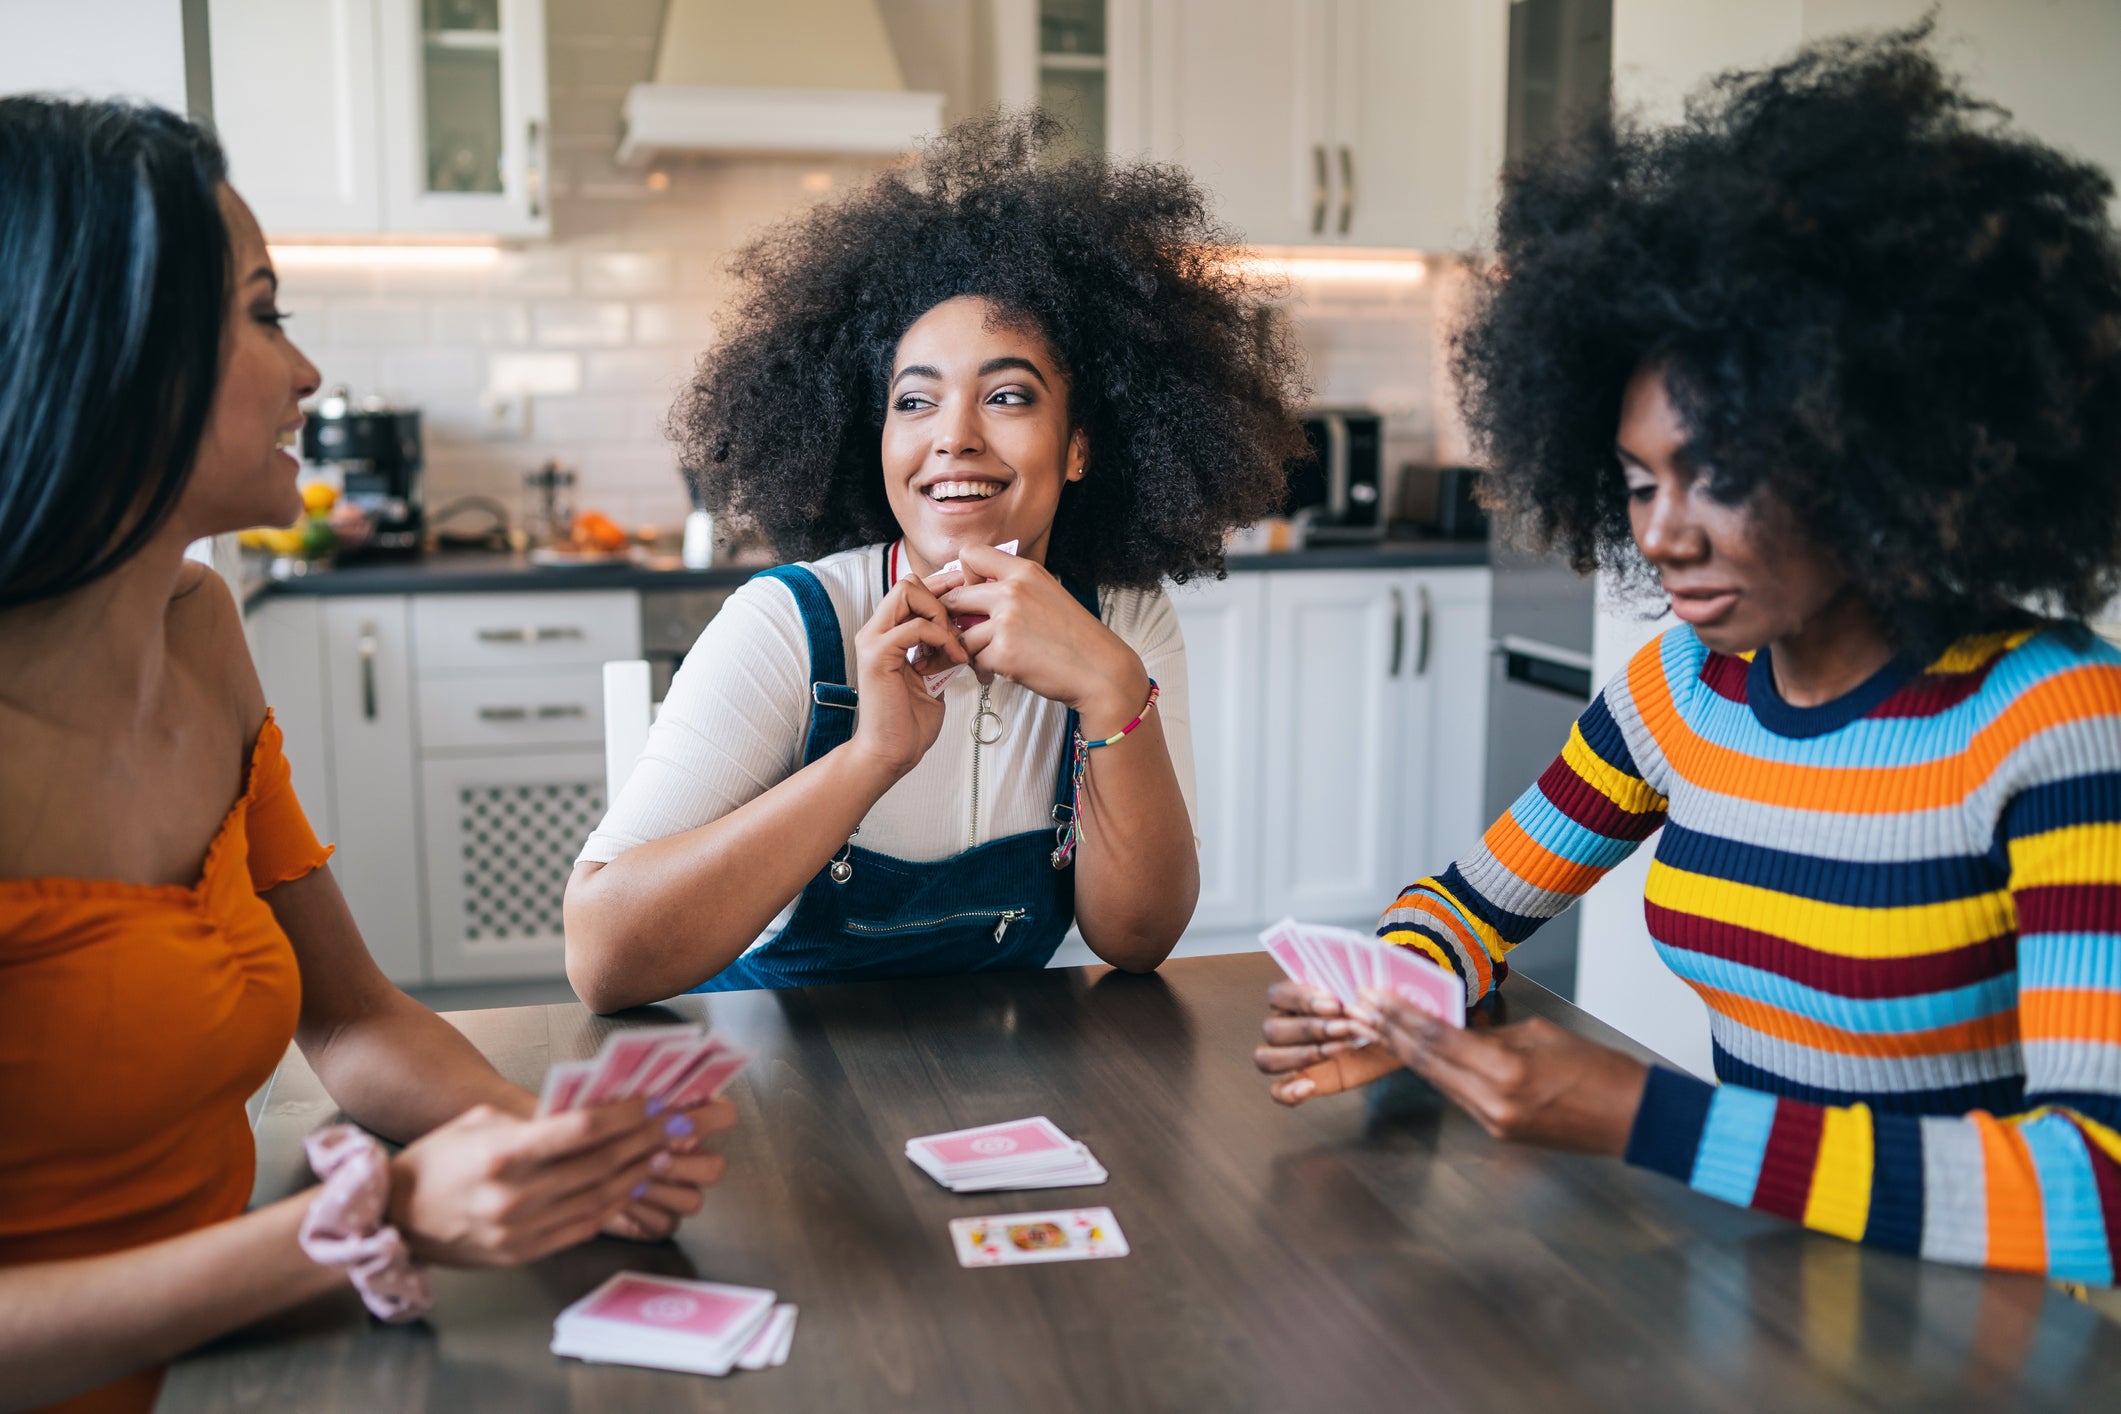 Black Owned Games For Your Next Socially Distanced Game Night